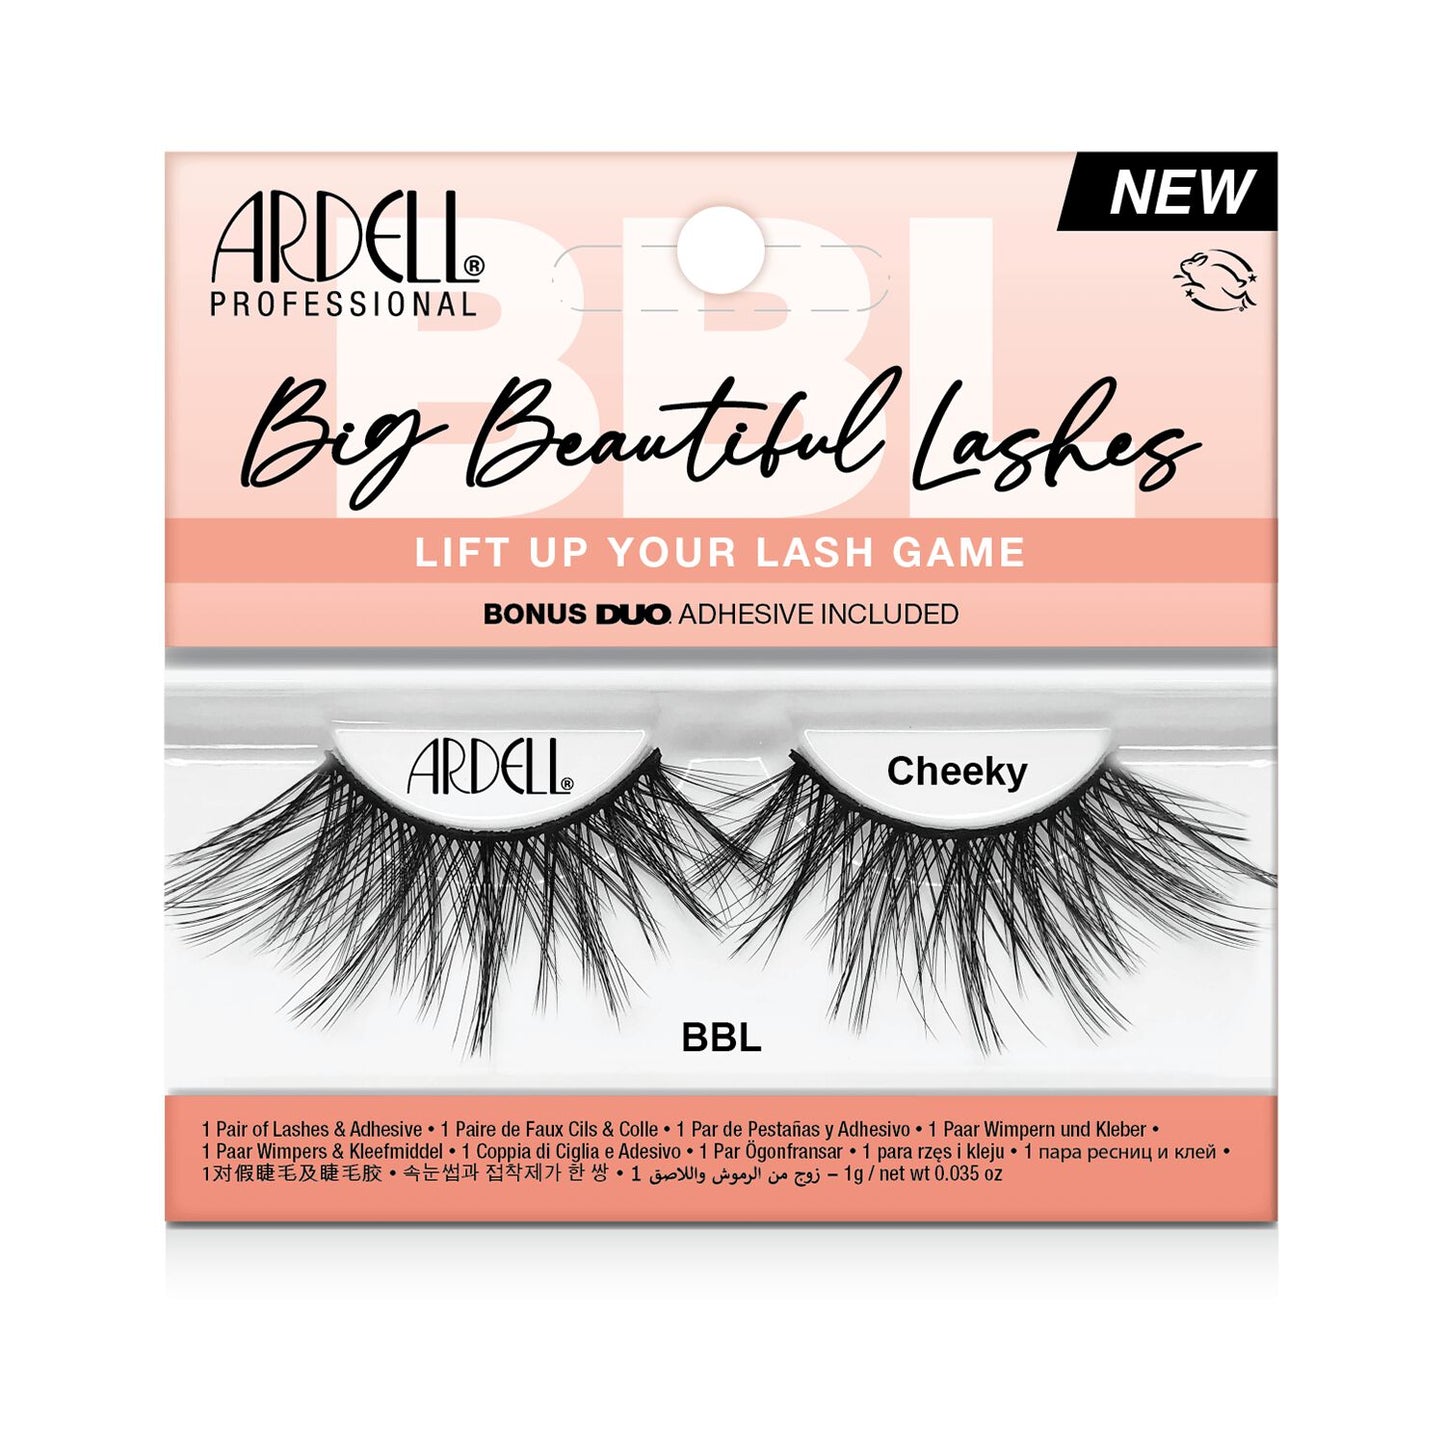 Big Beautiful Lashes  by   Ardell Cheeky Big Beautiful Lashes